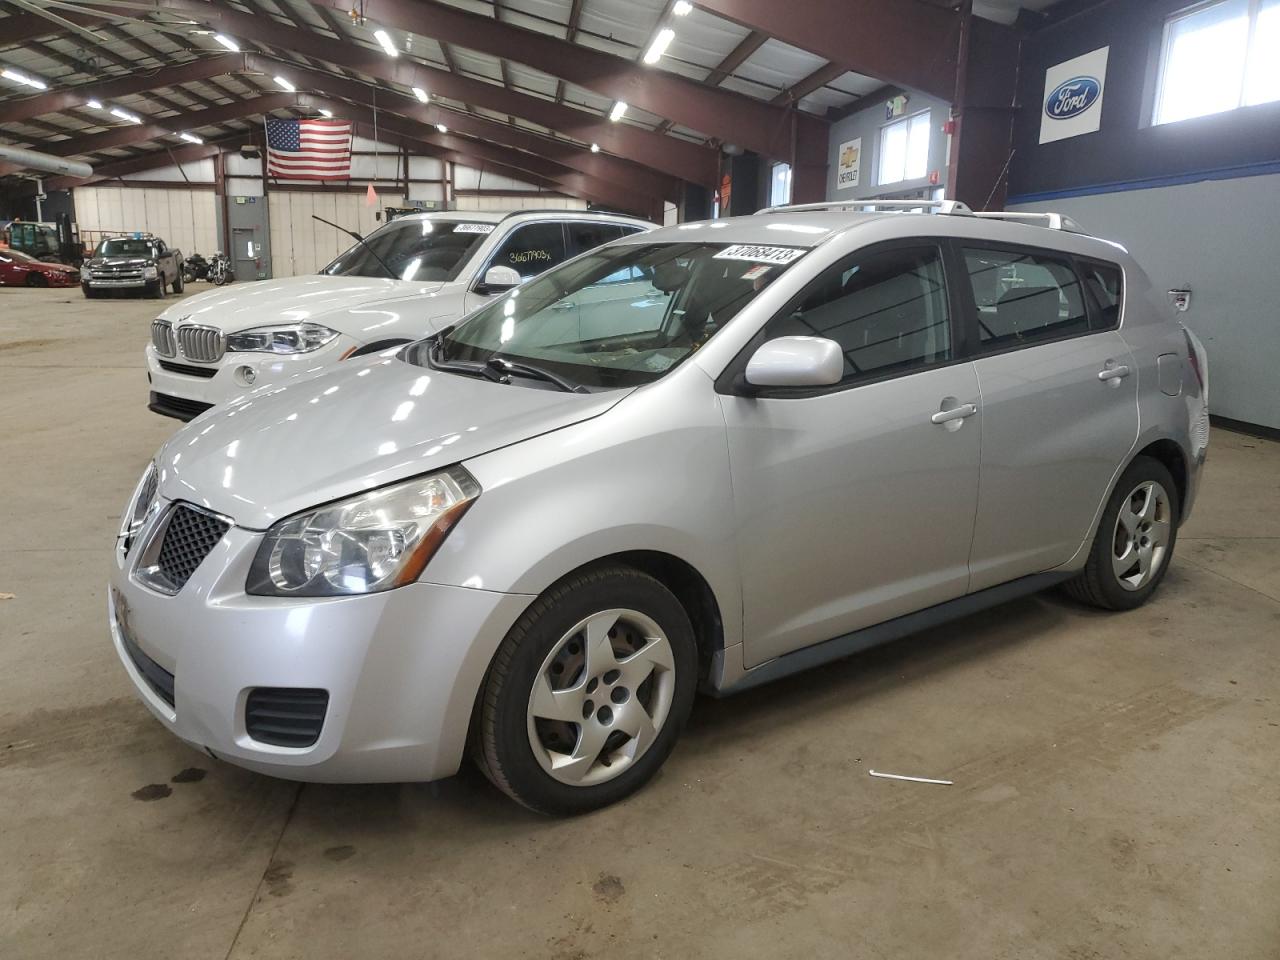 2010 Pontiac Vibe for sale at Copart East Granby, CT. Lot #37068*** |  SalvageAutosAuction.com